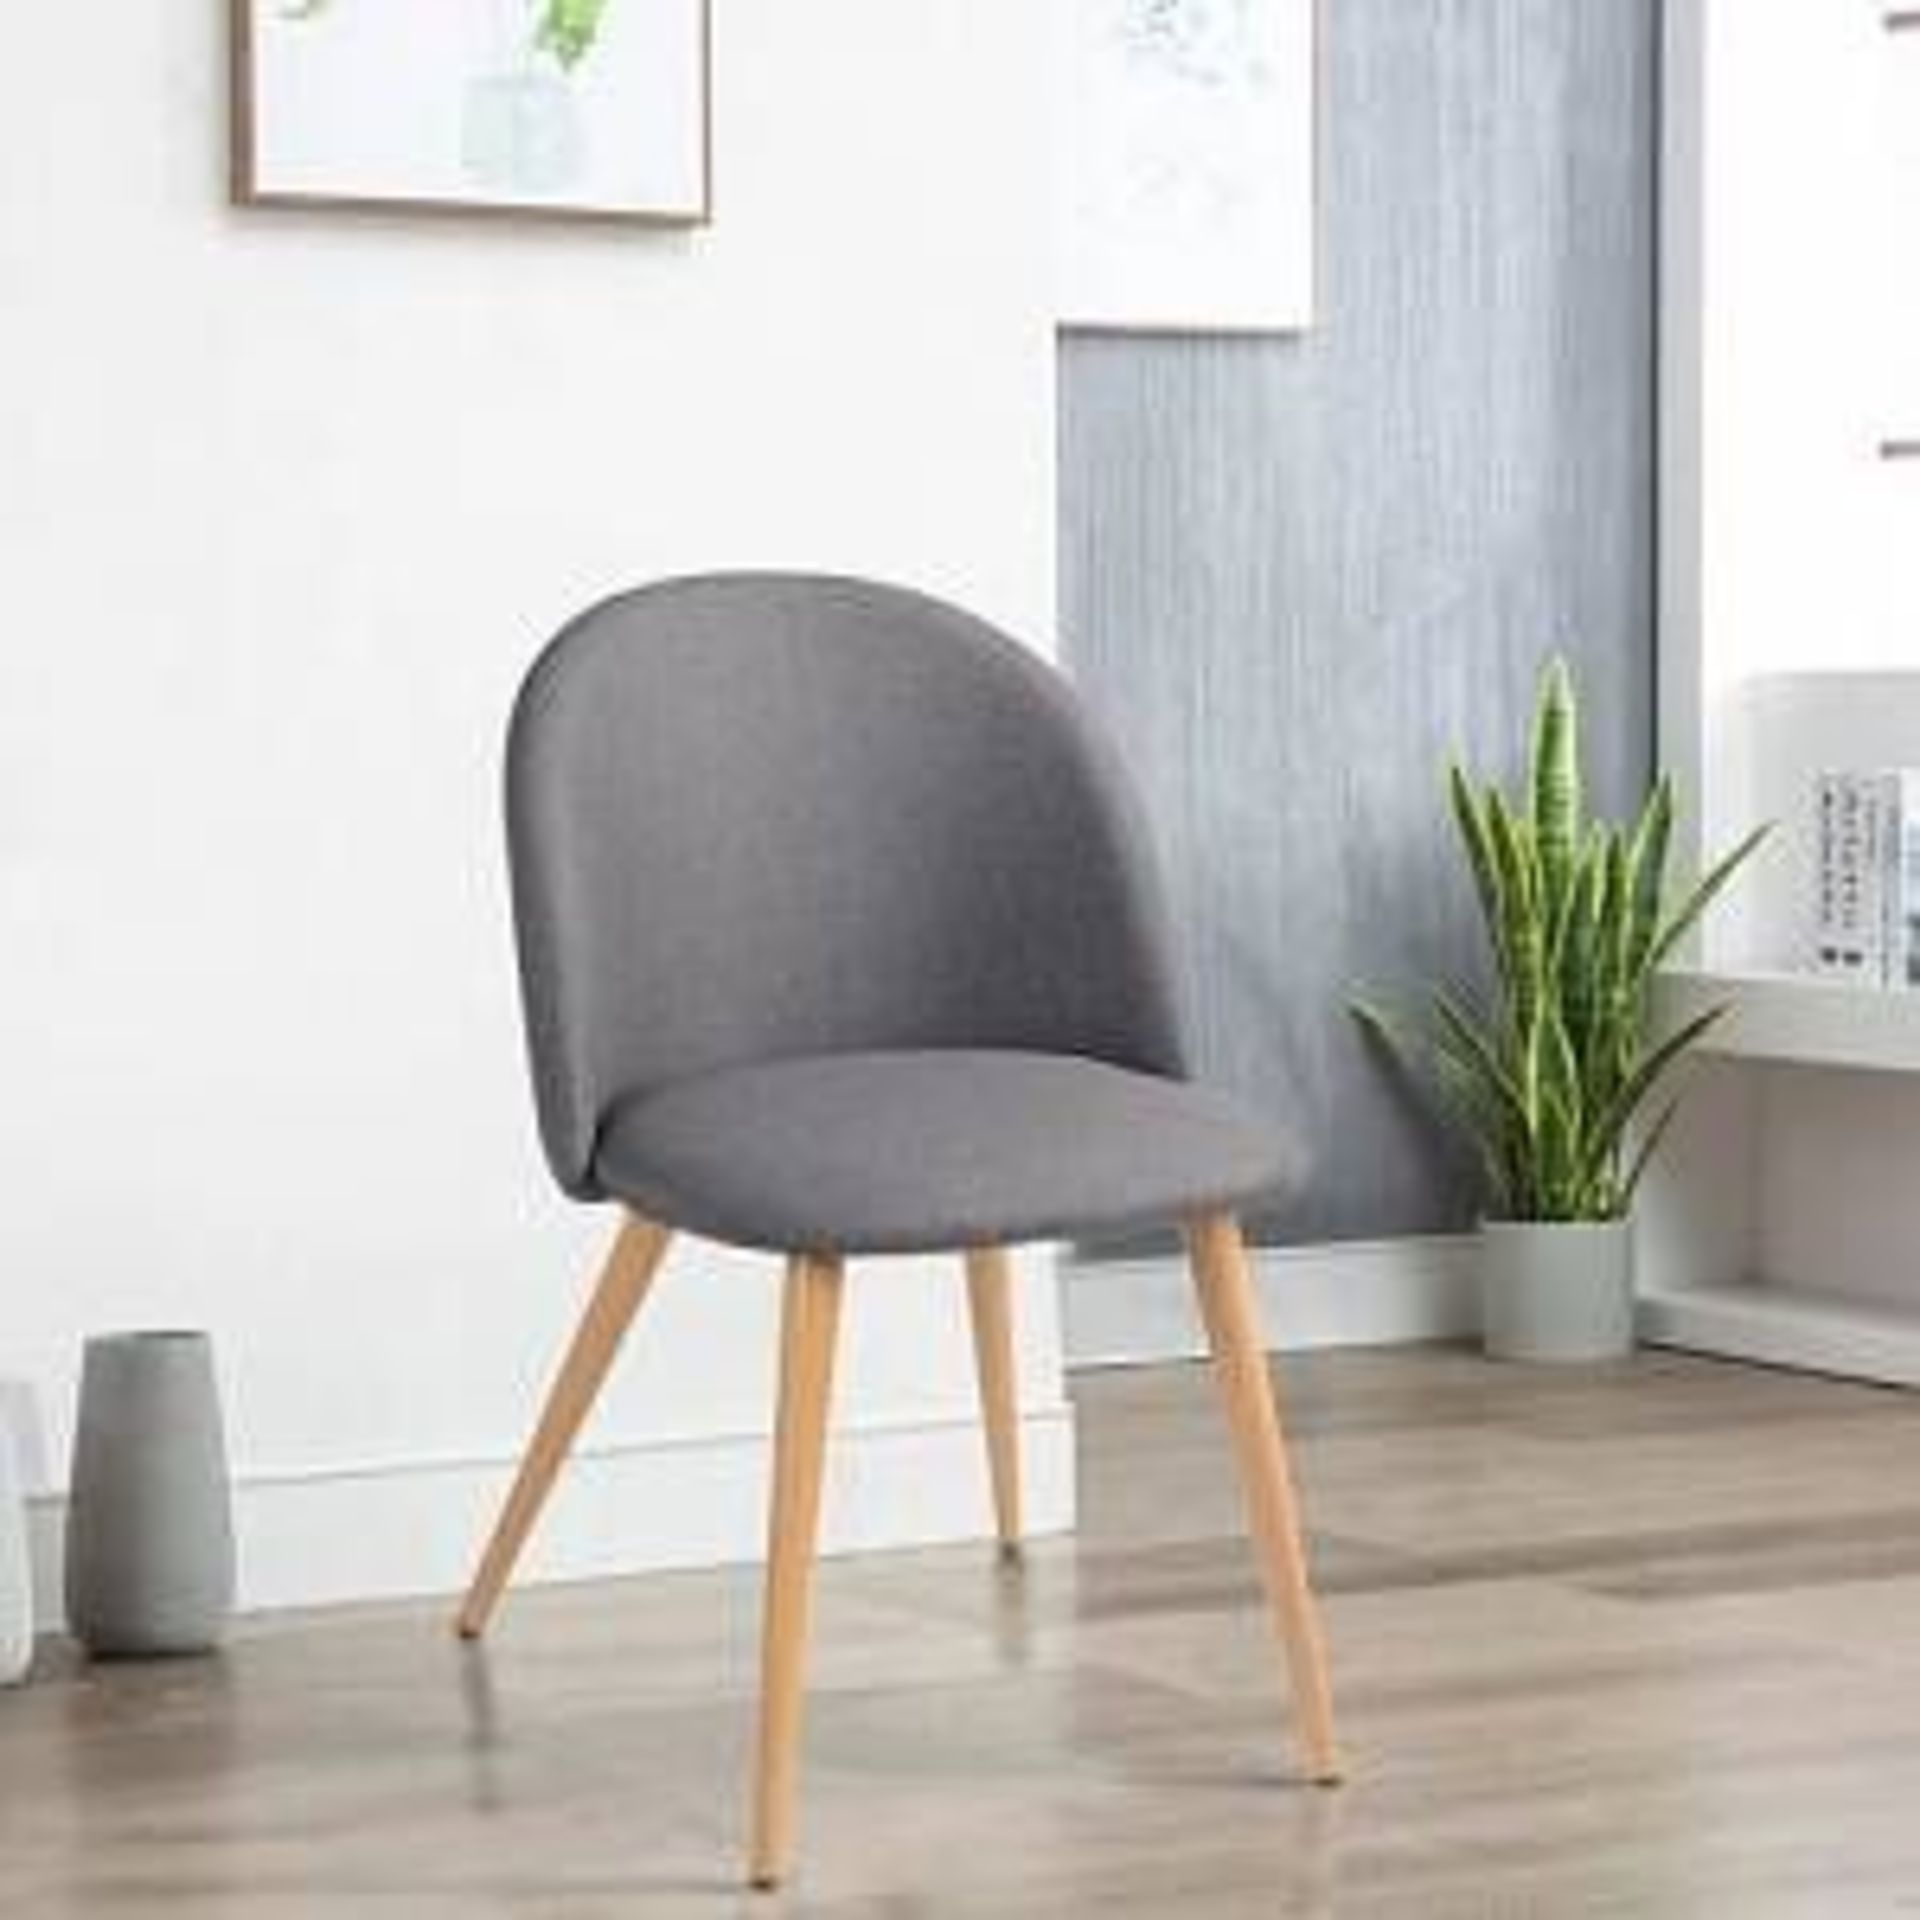 BOXED AISLIN UPHOLSTERED DINING CHAIR RRP £72.99 (POSSIBILITY THAT THE IMAGE IS INCORRECT - BUYER